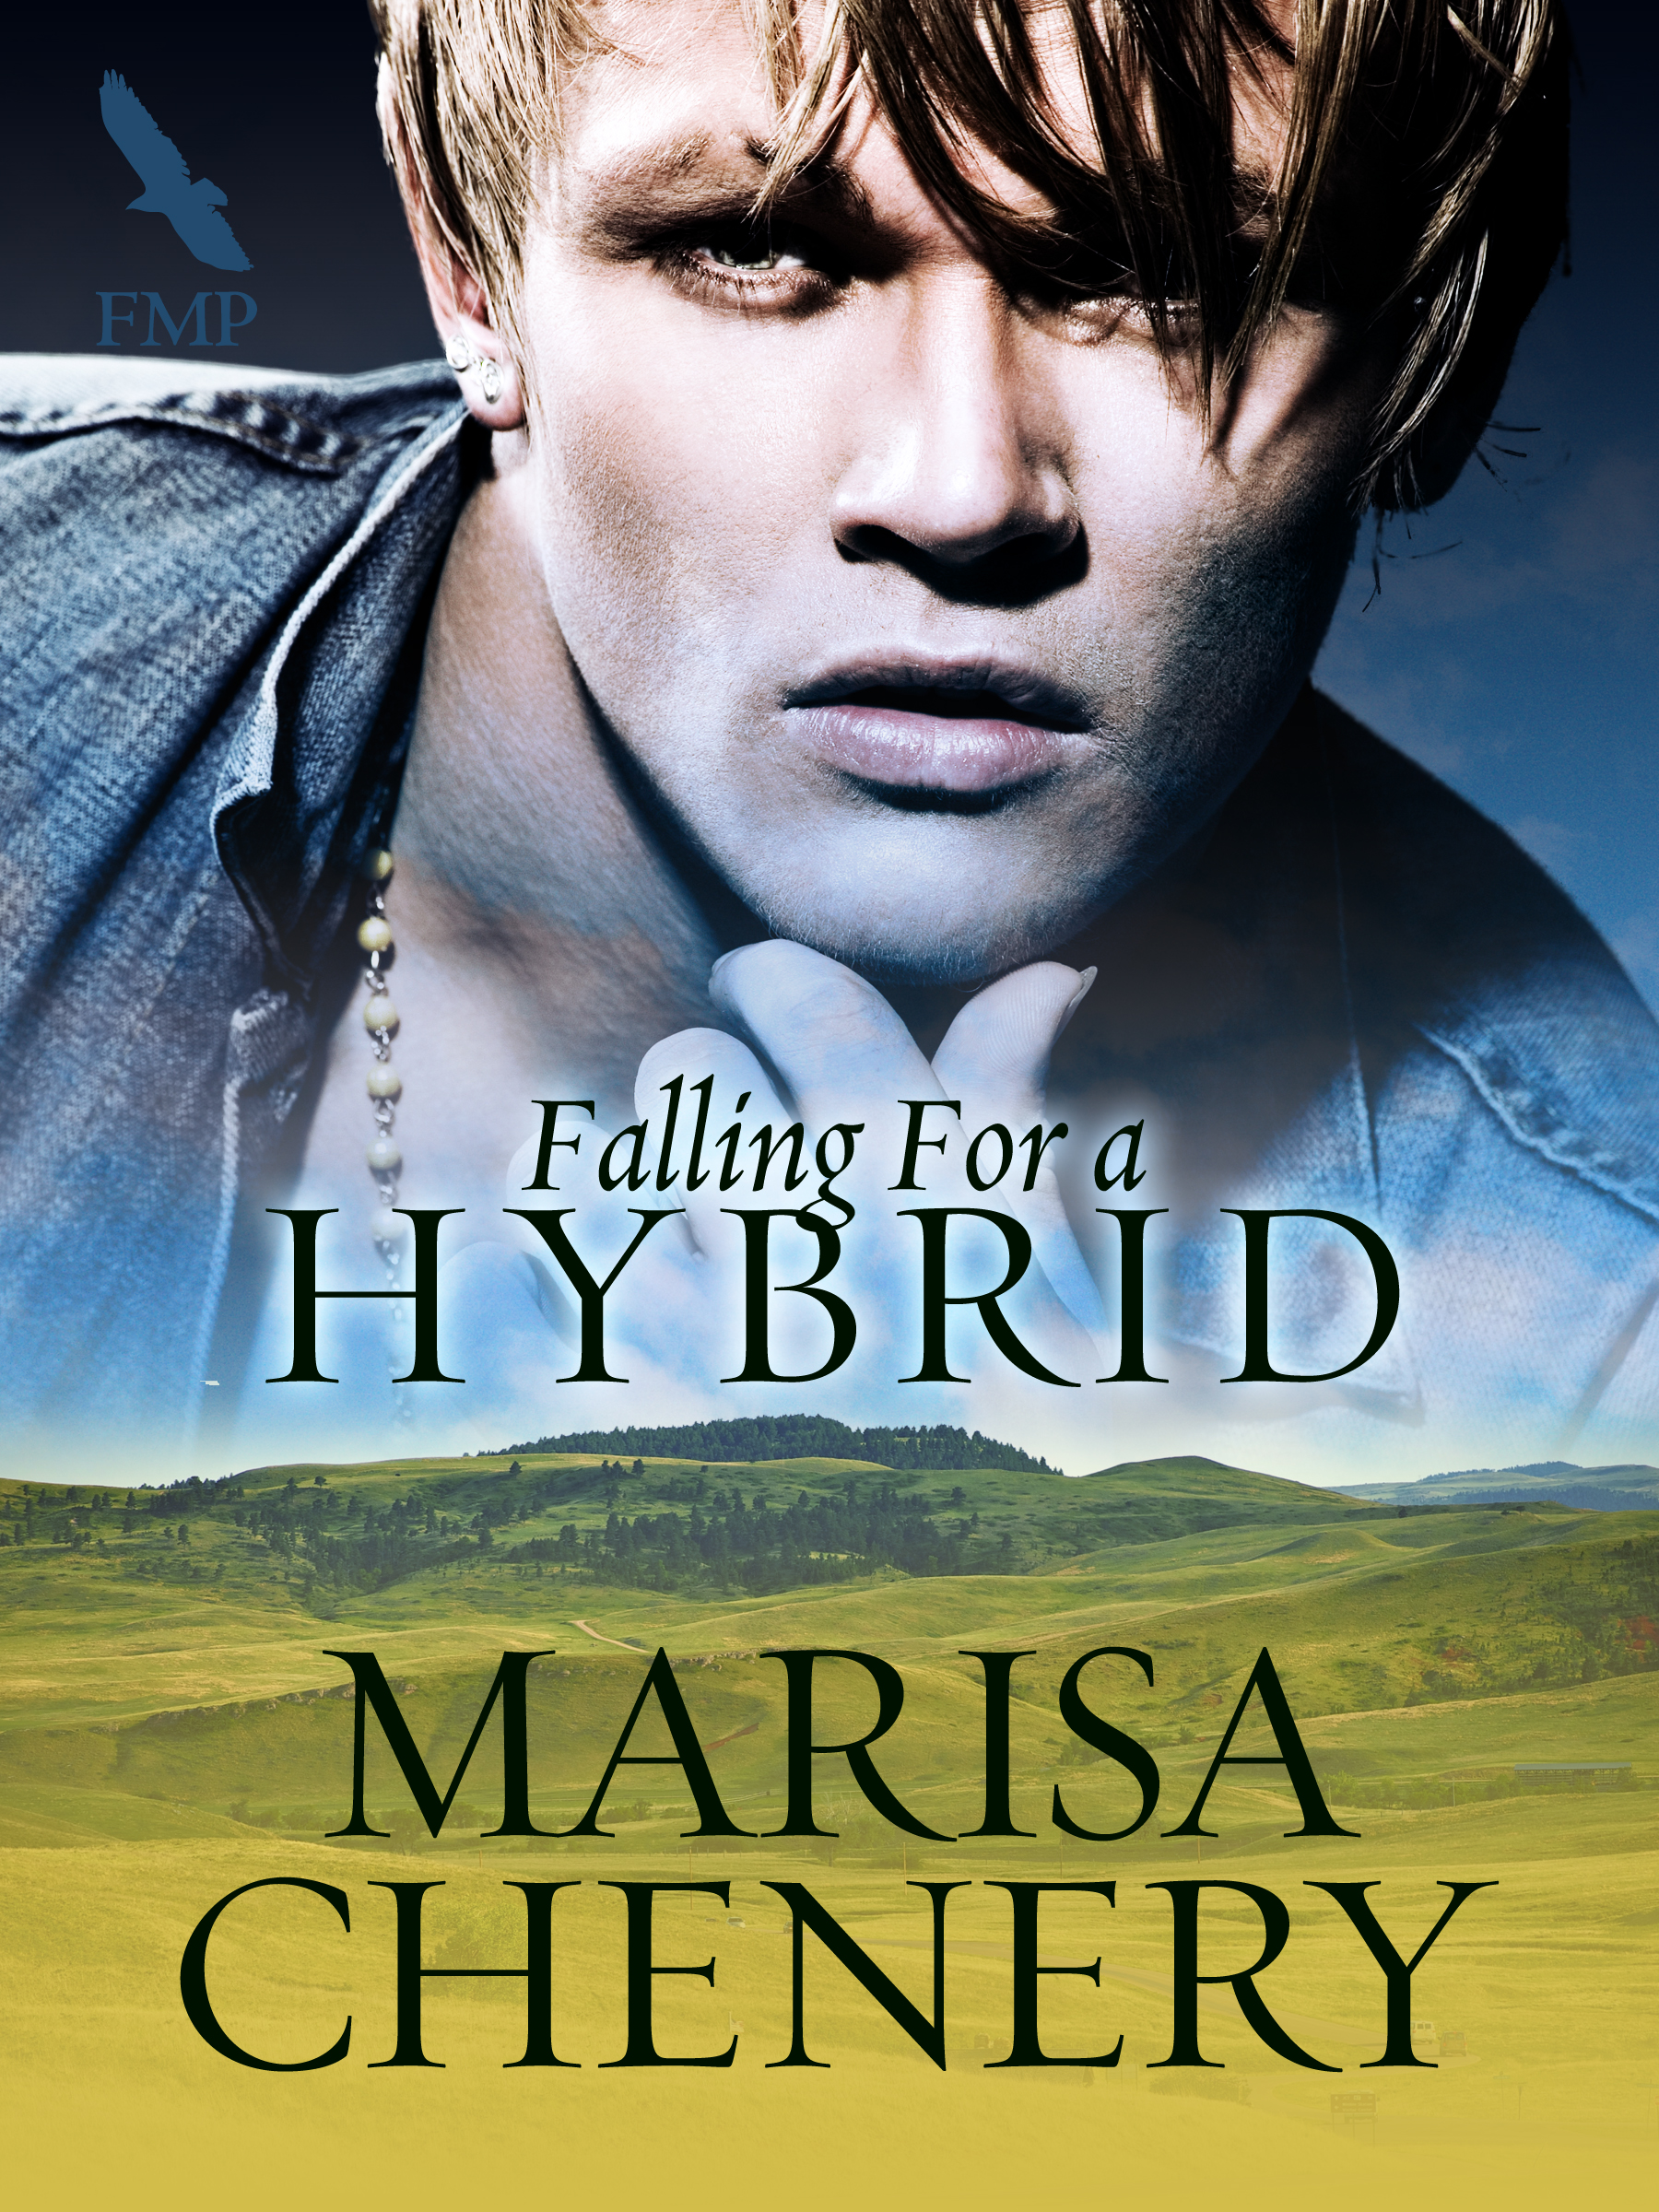 Falling For a Hybrid (2014) by Marisa Chenery